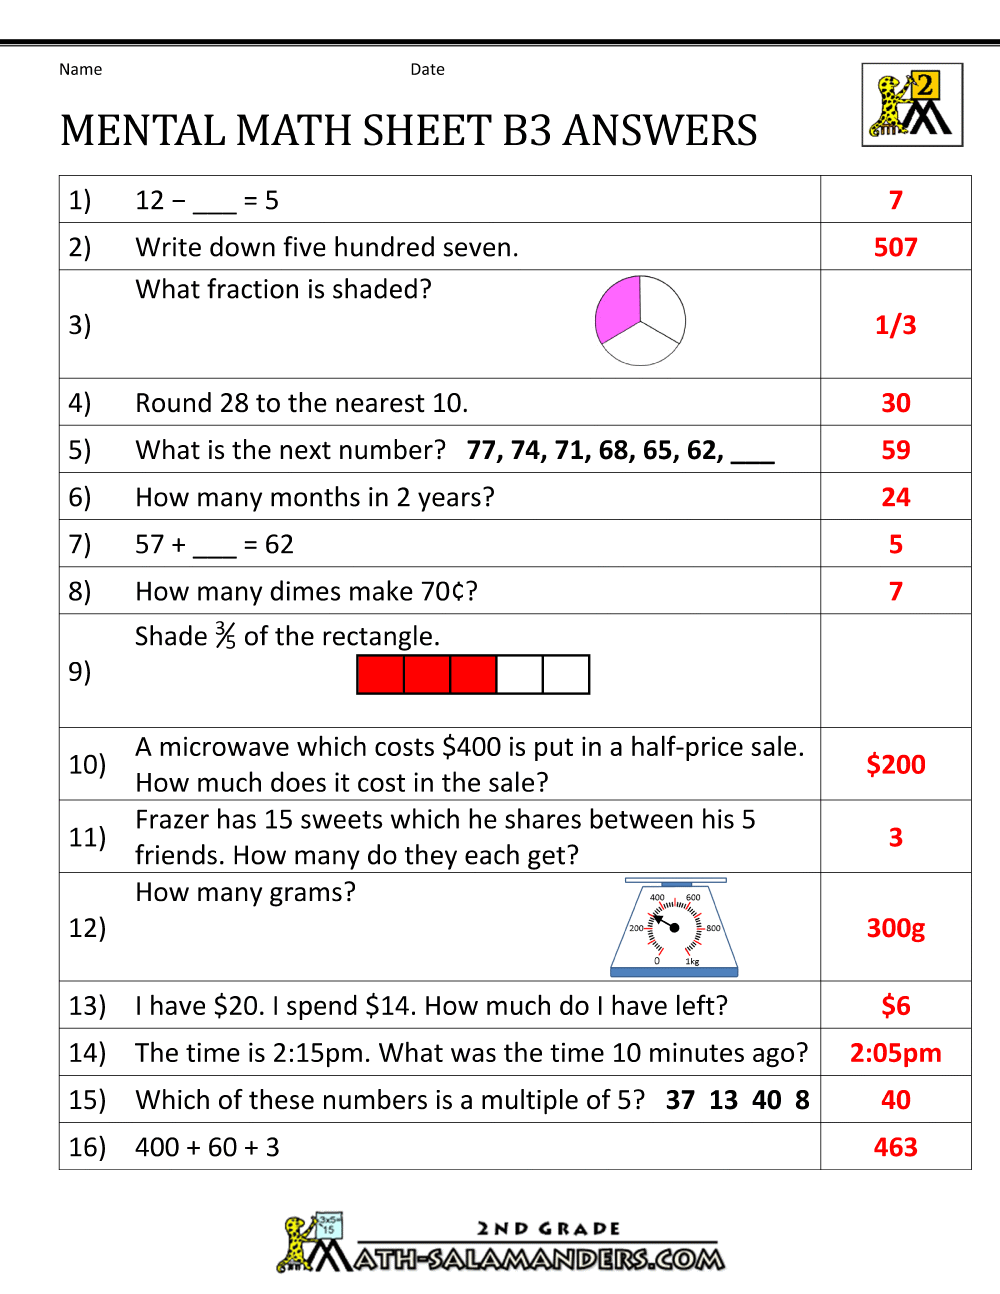 homework and practice 2 2 mental math answers